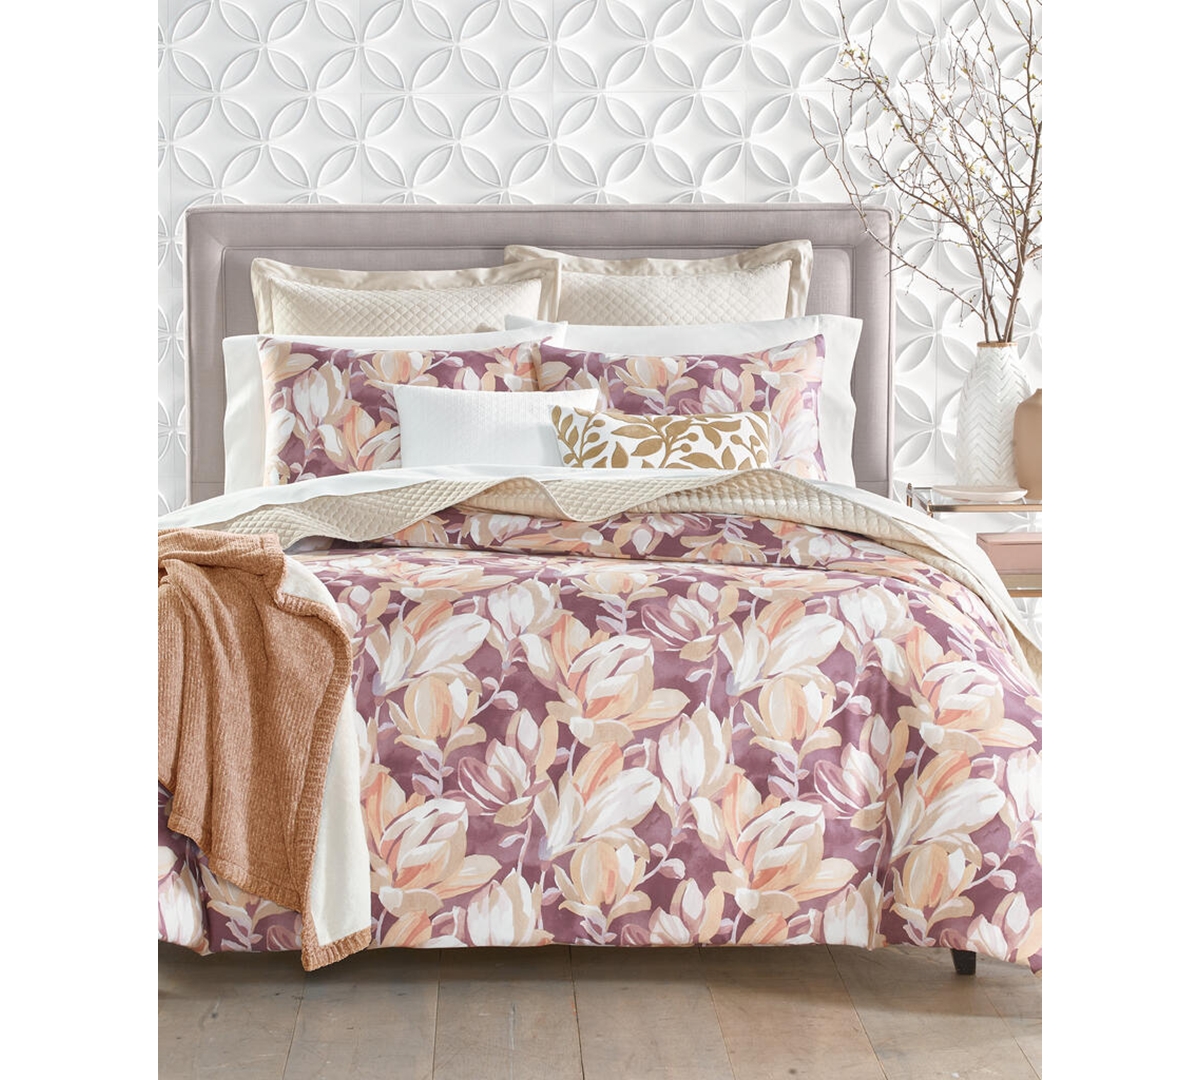 Charter Club Damask Designs Magnolia 3-pc. Comforter Set, Full/queen, Created For Macy's In Purple